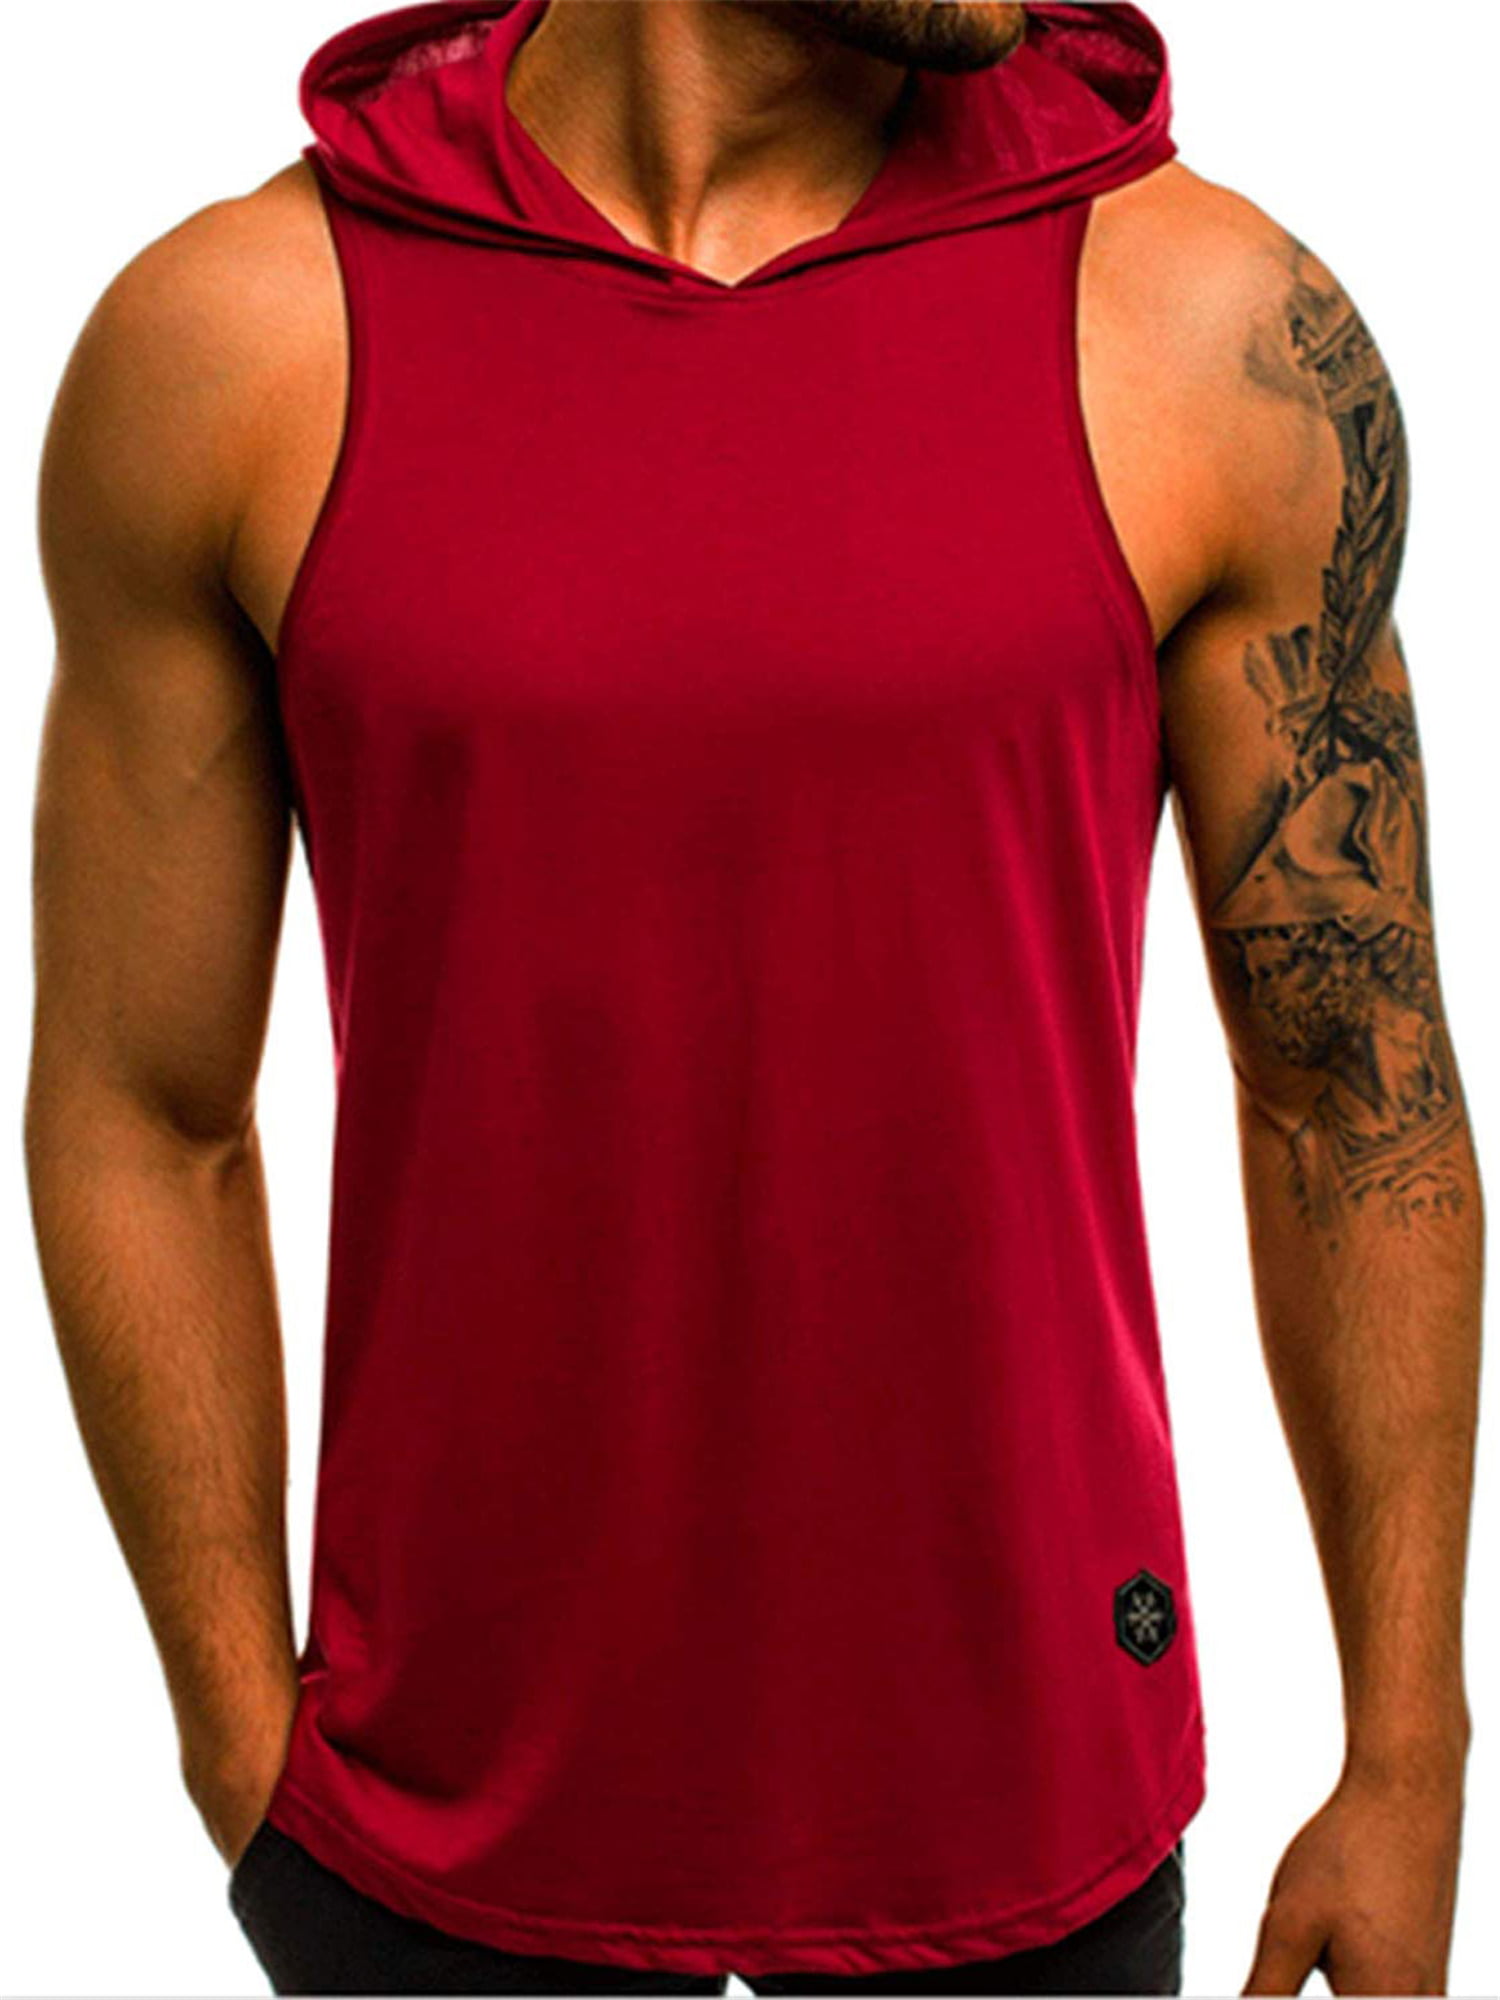 Men Bodybuilding Hooded Vest Tank Top Gym Sports Fitness Muscle T-Shirt Blouse 